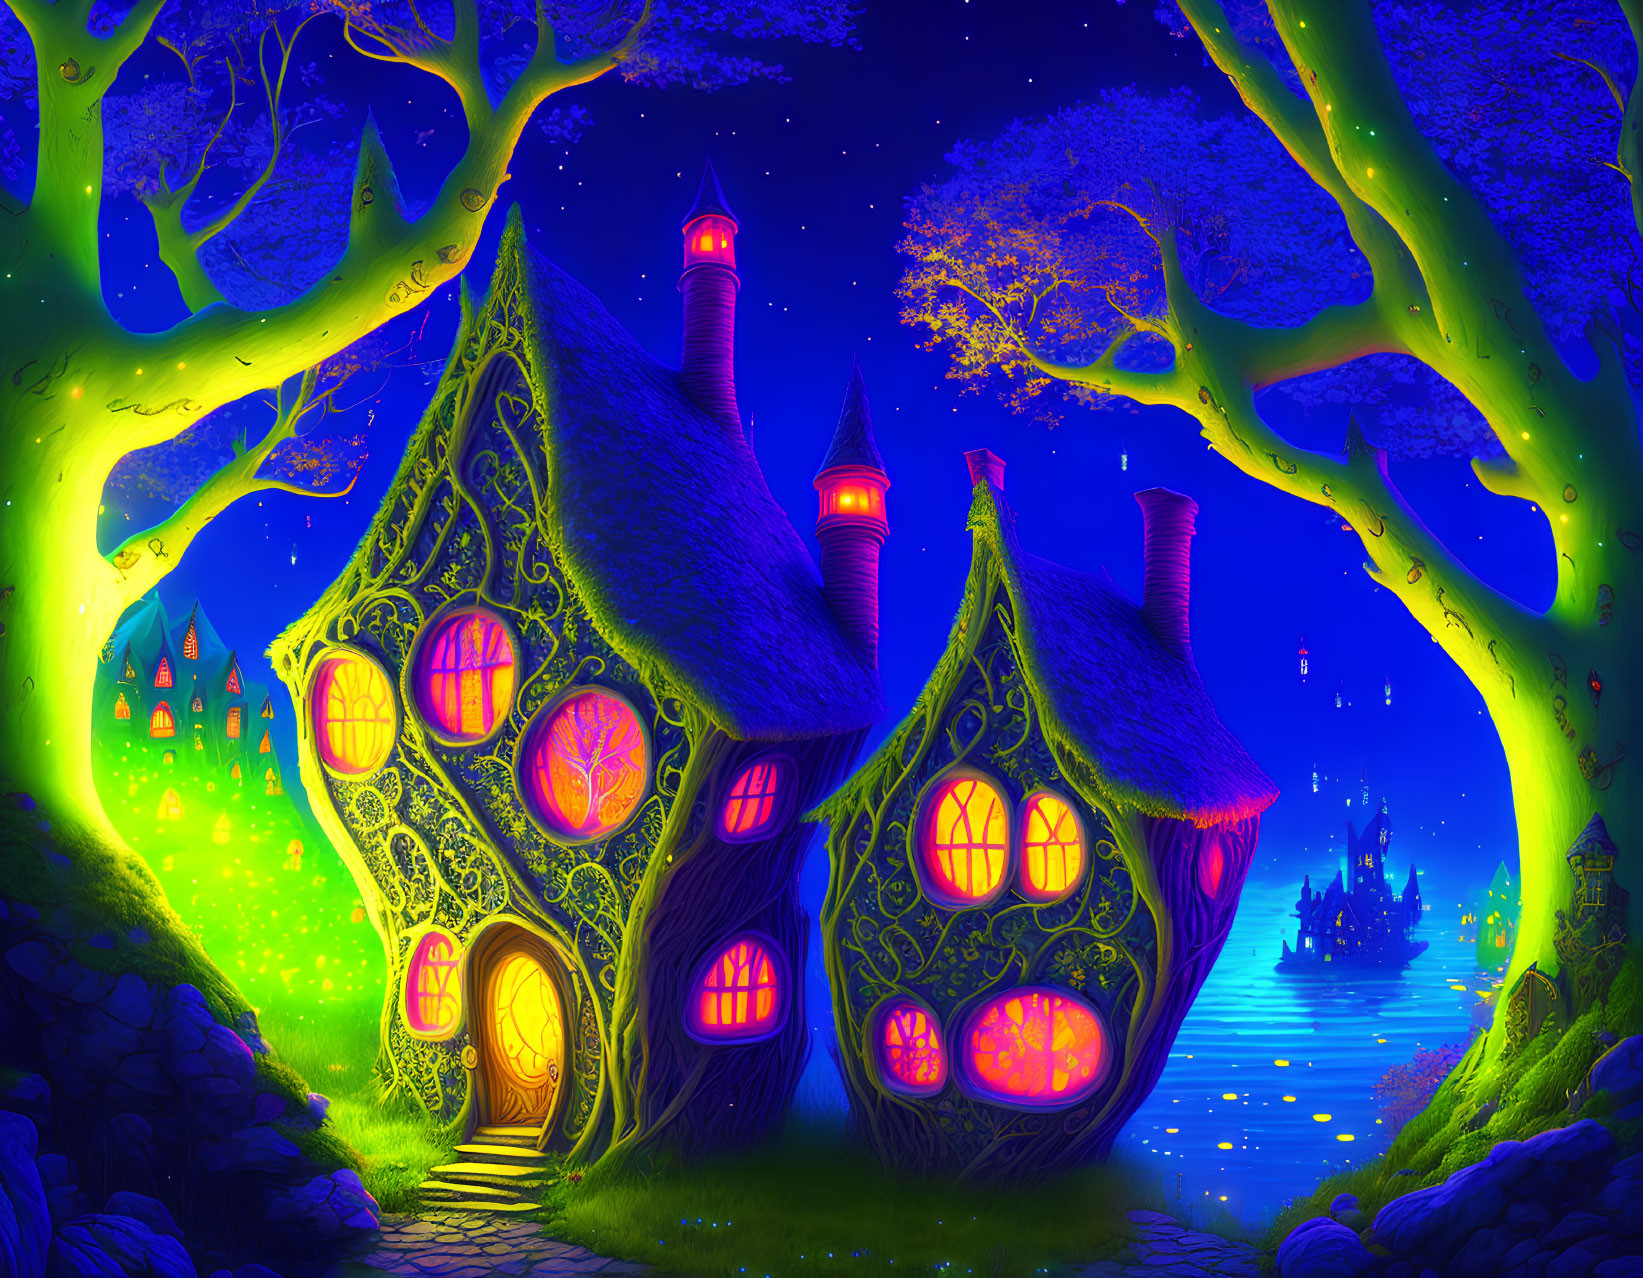 Fantasy illustration of whimsical cottage, glowing trees, and distant castle